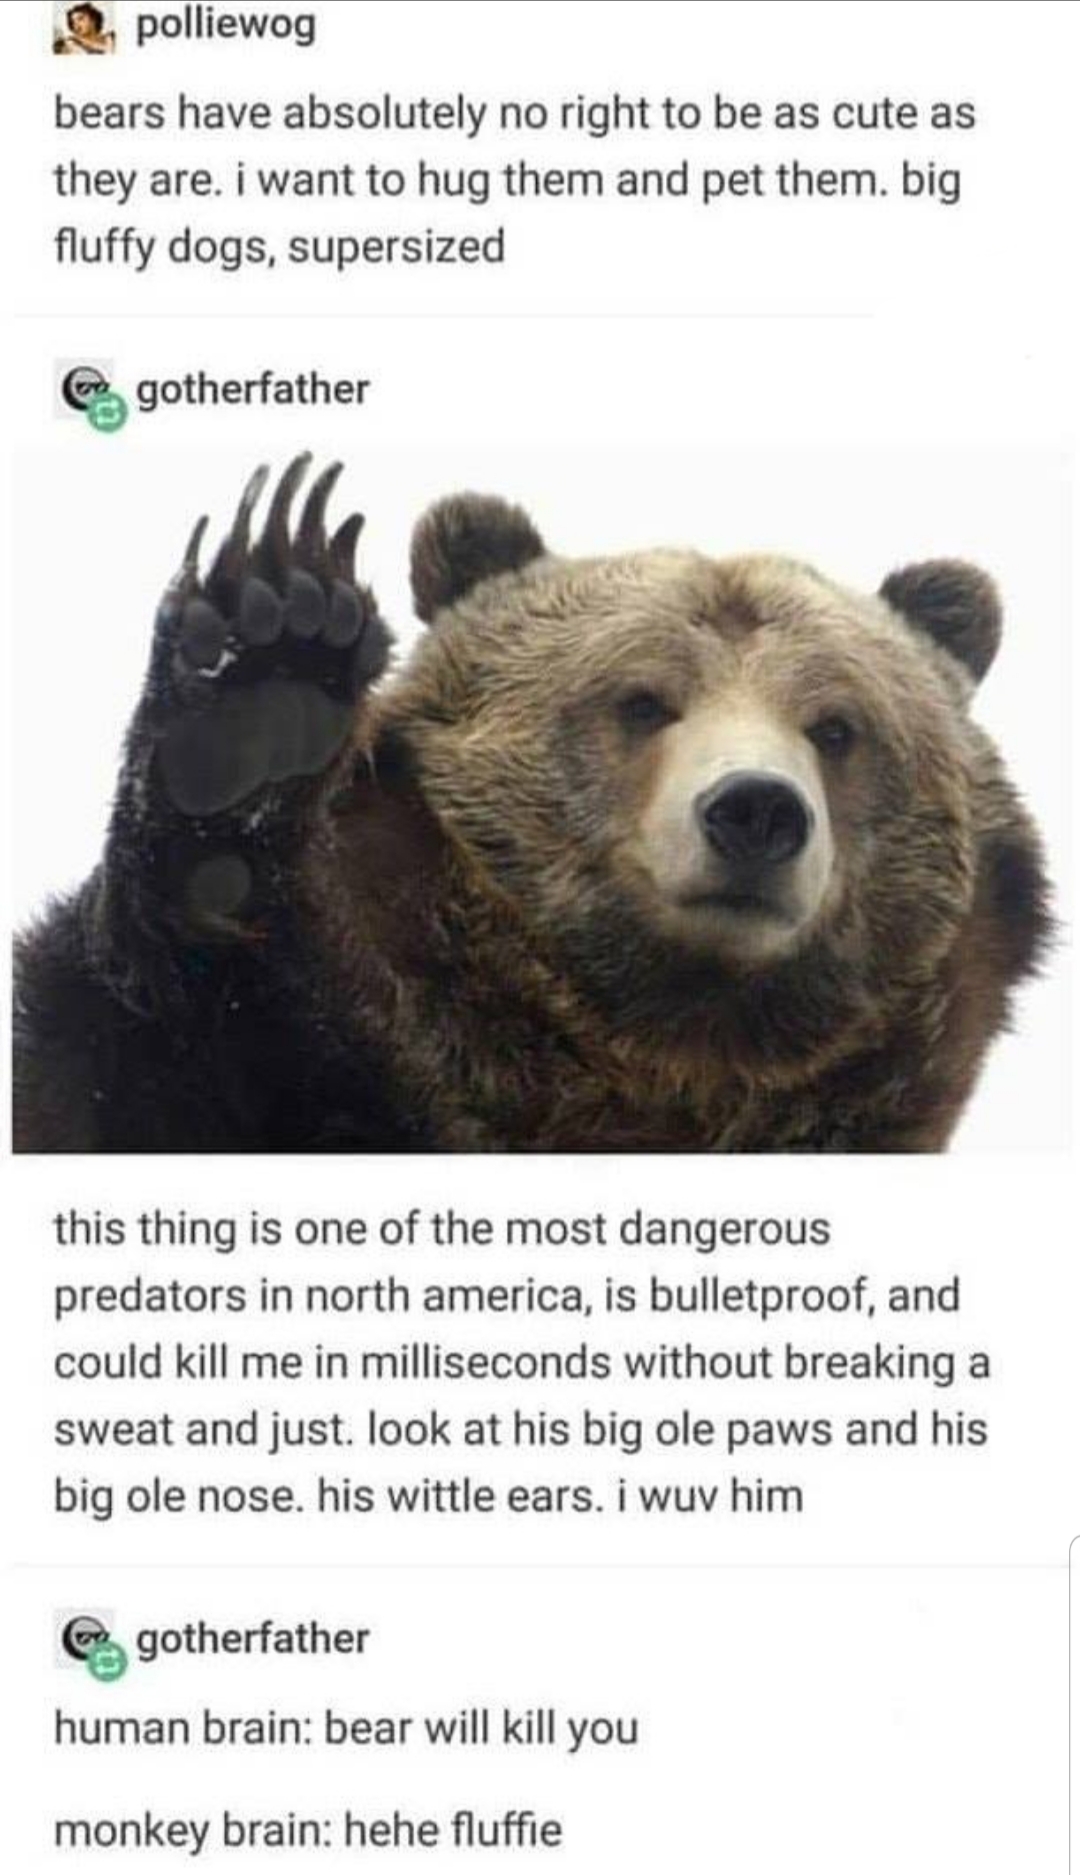 bear meme - . polliewog bears have absolutely no right to be as cute as they are. i want to hug them and pet them. big fluffy dogs, supersized gotherfather this thing is one of the most dangerous predators in north america, is bulletproof, and could kill 